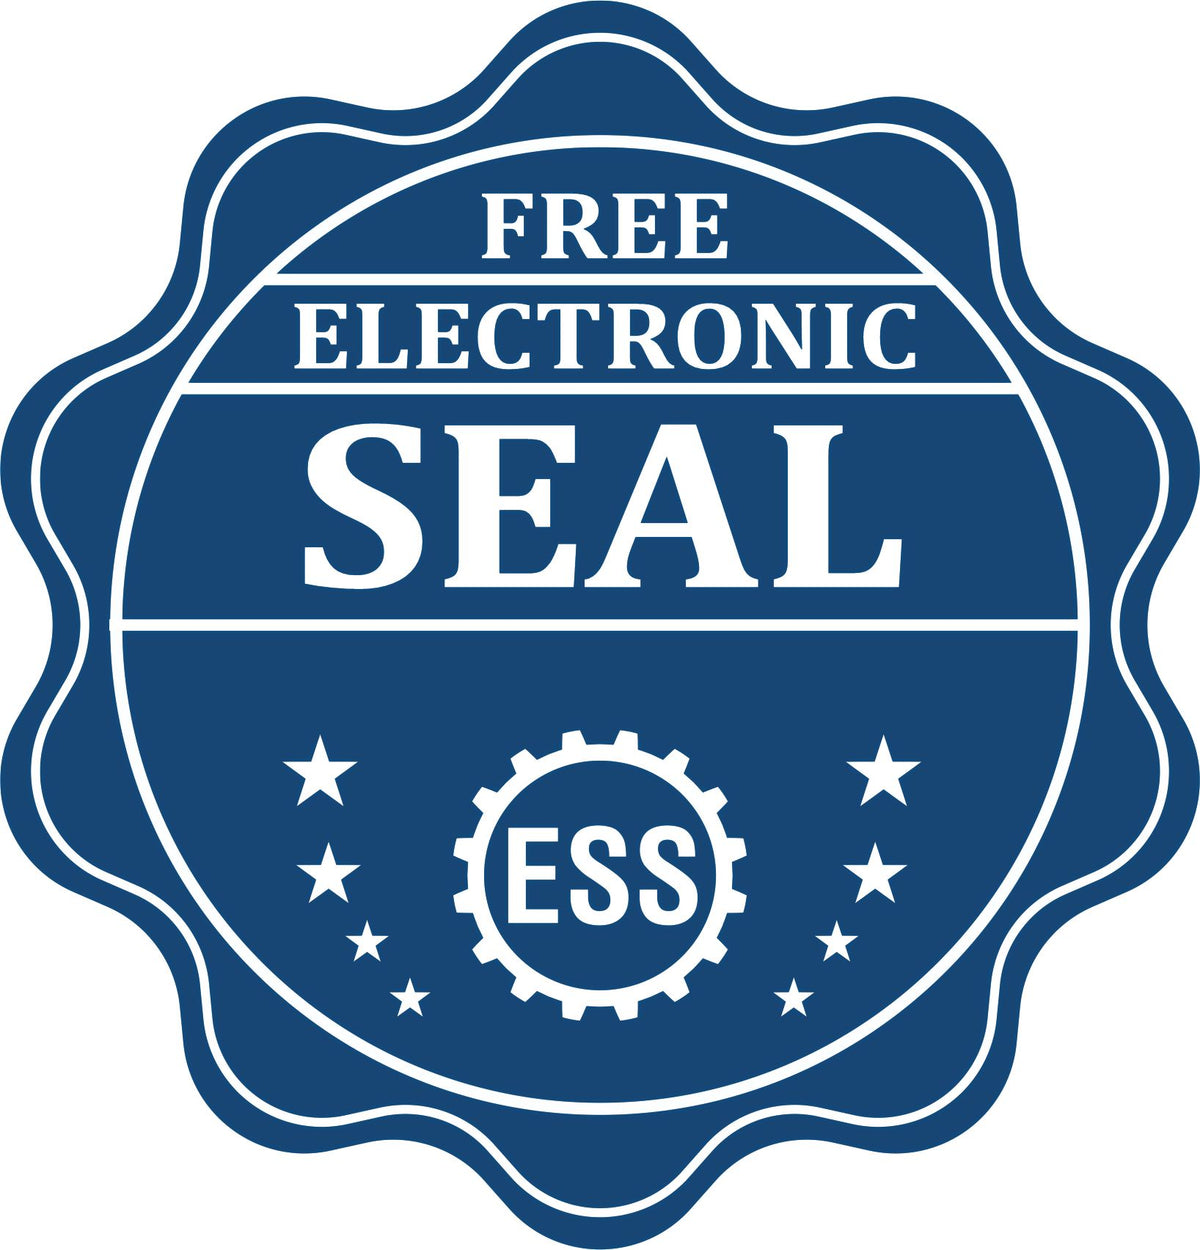 A badge showing a free electronic seal for the Premium MaxLight Pre-Inked Alaska Geology Stamp with stars and the ESS gear on the emblem.